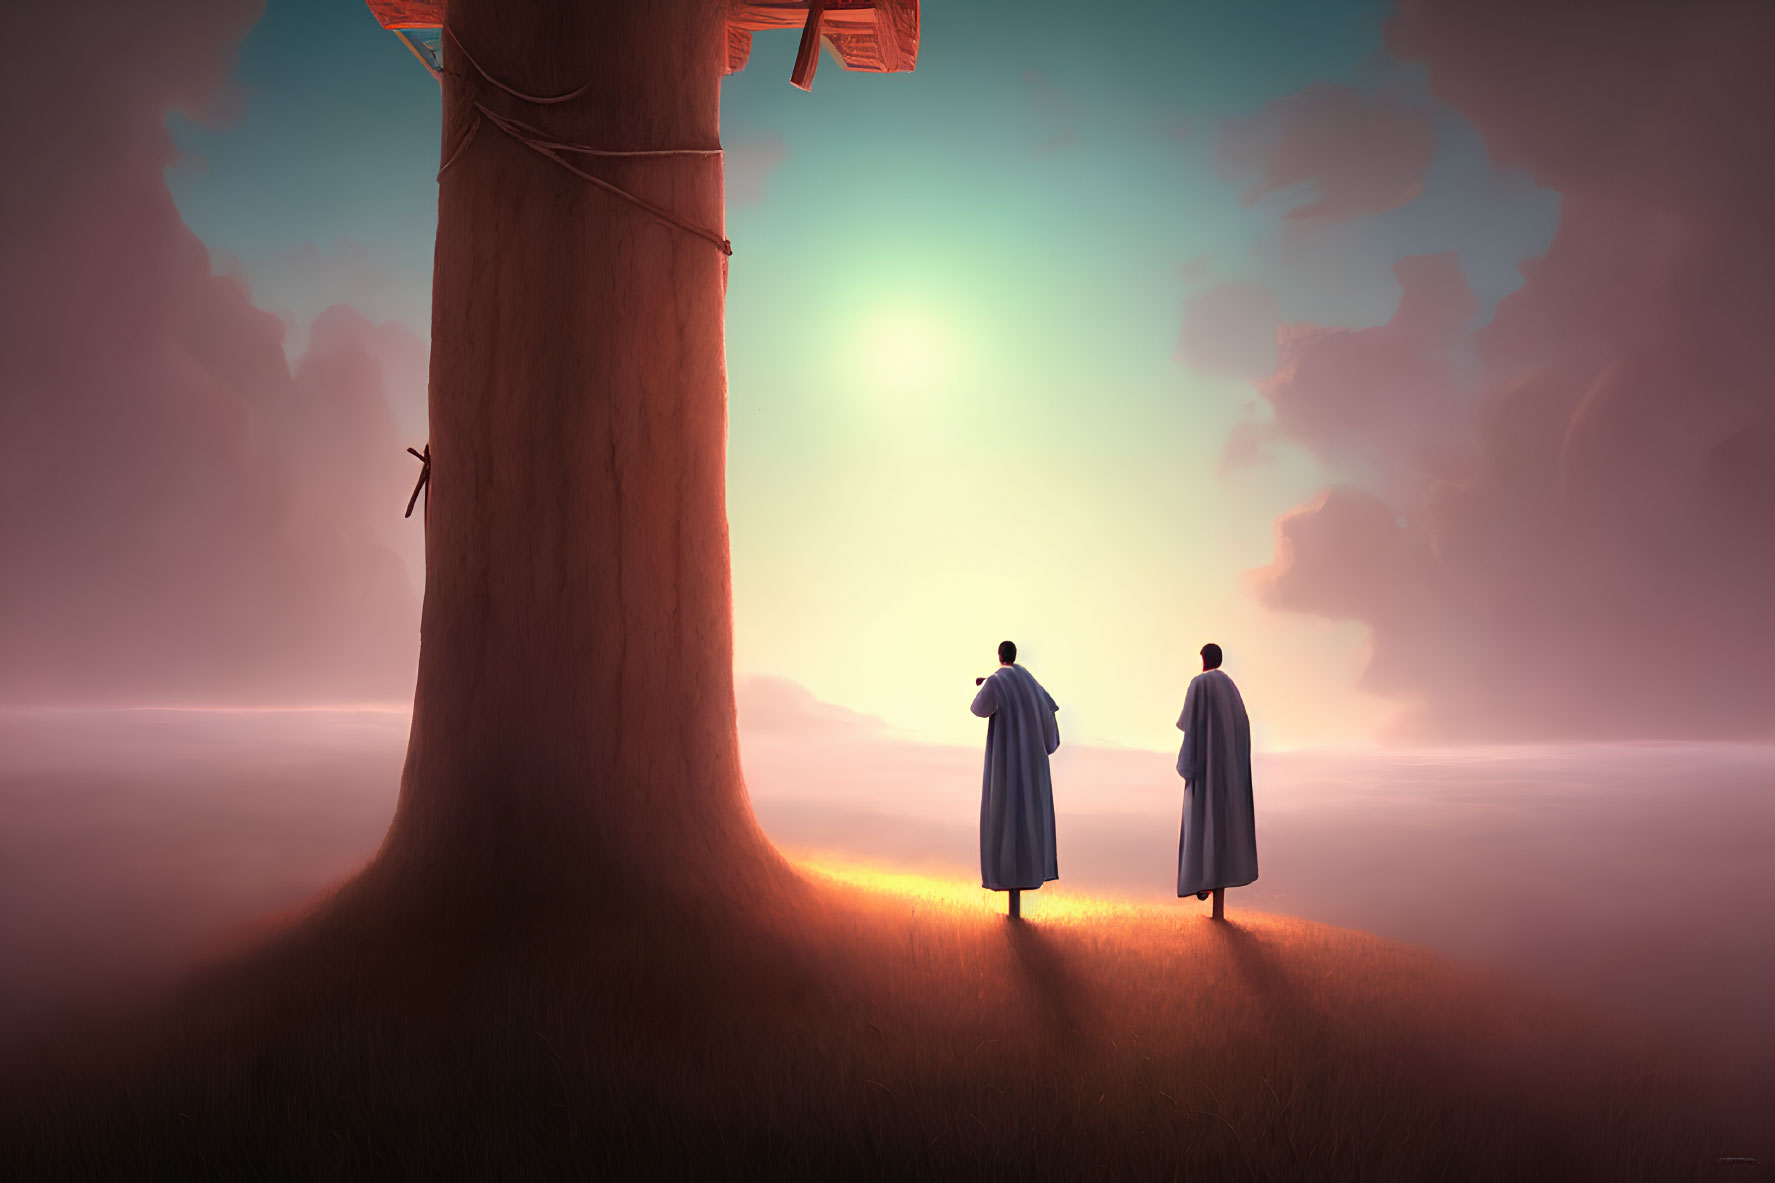 Two People in Robes on Platforms by Giant Tree and Cloud Sea at Dusk